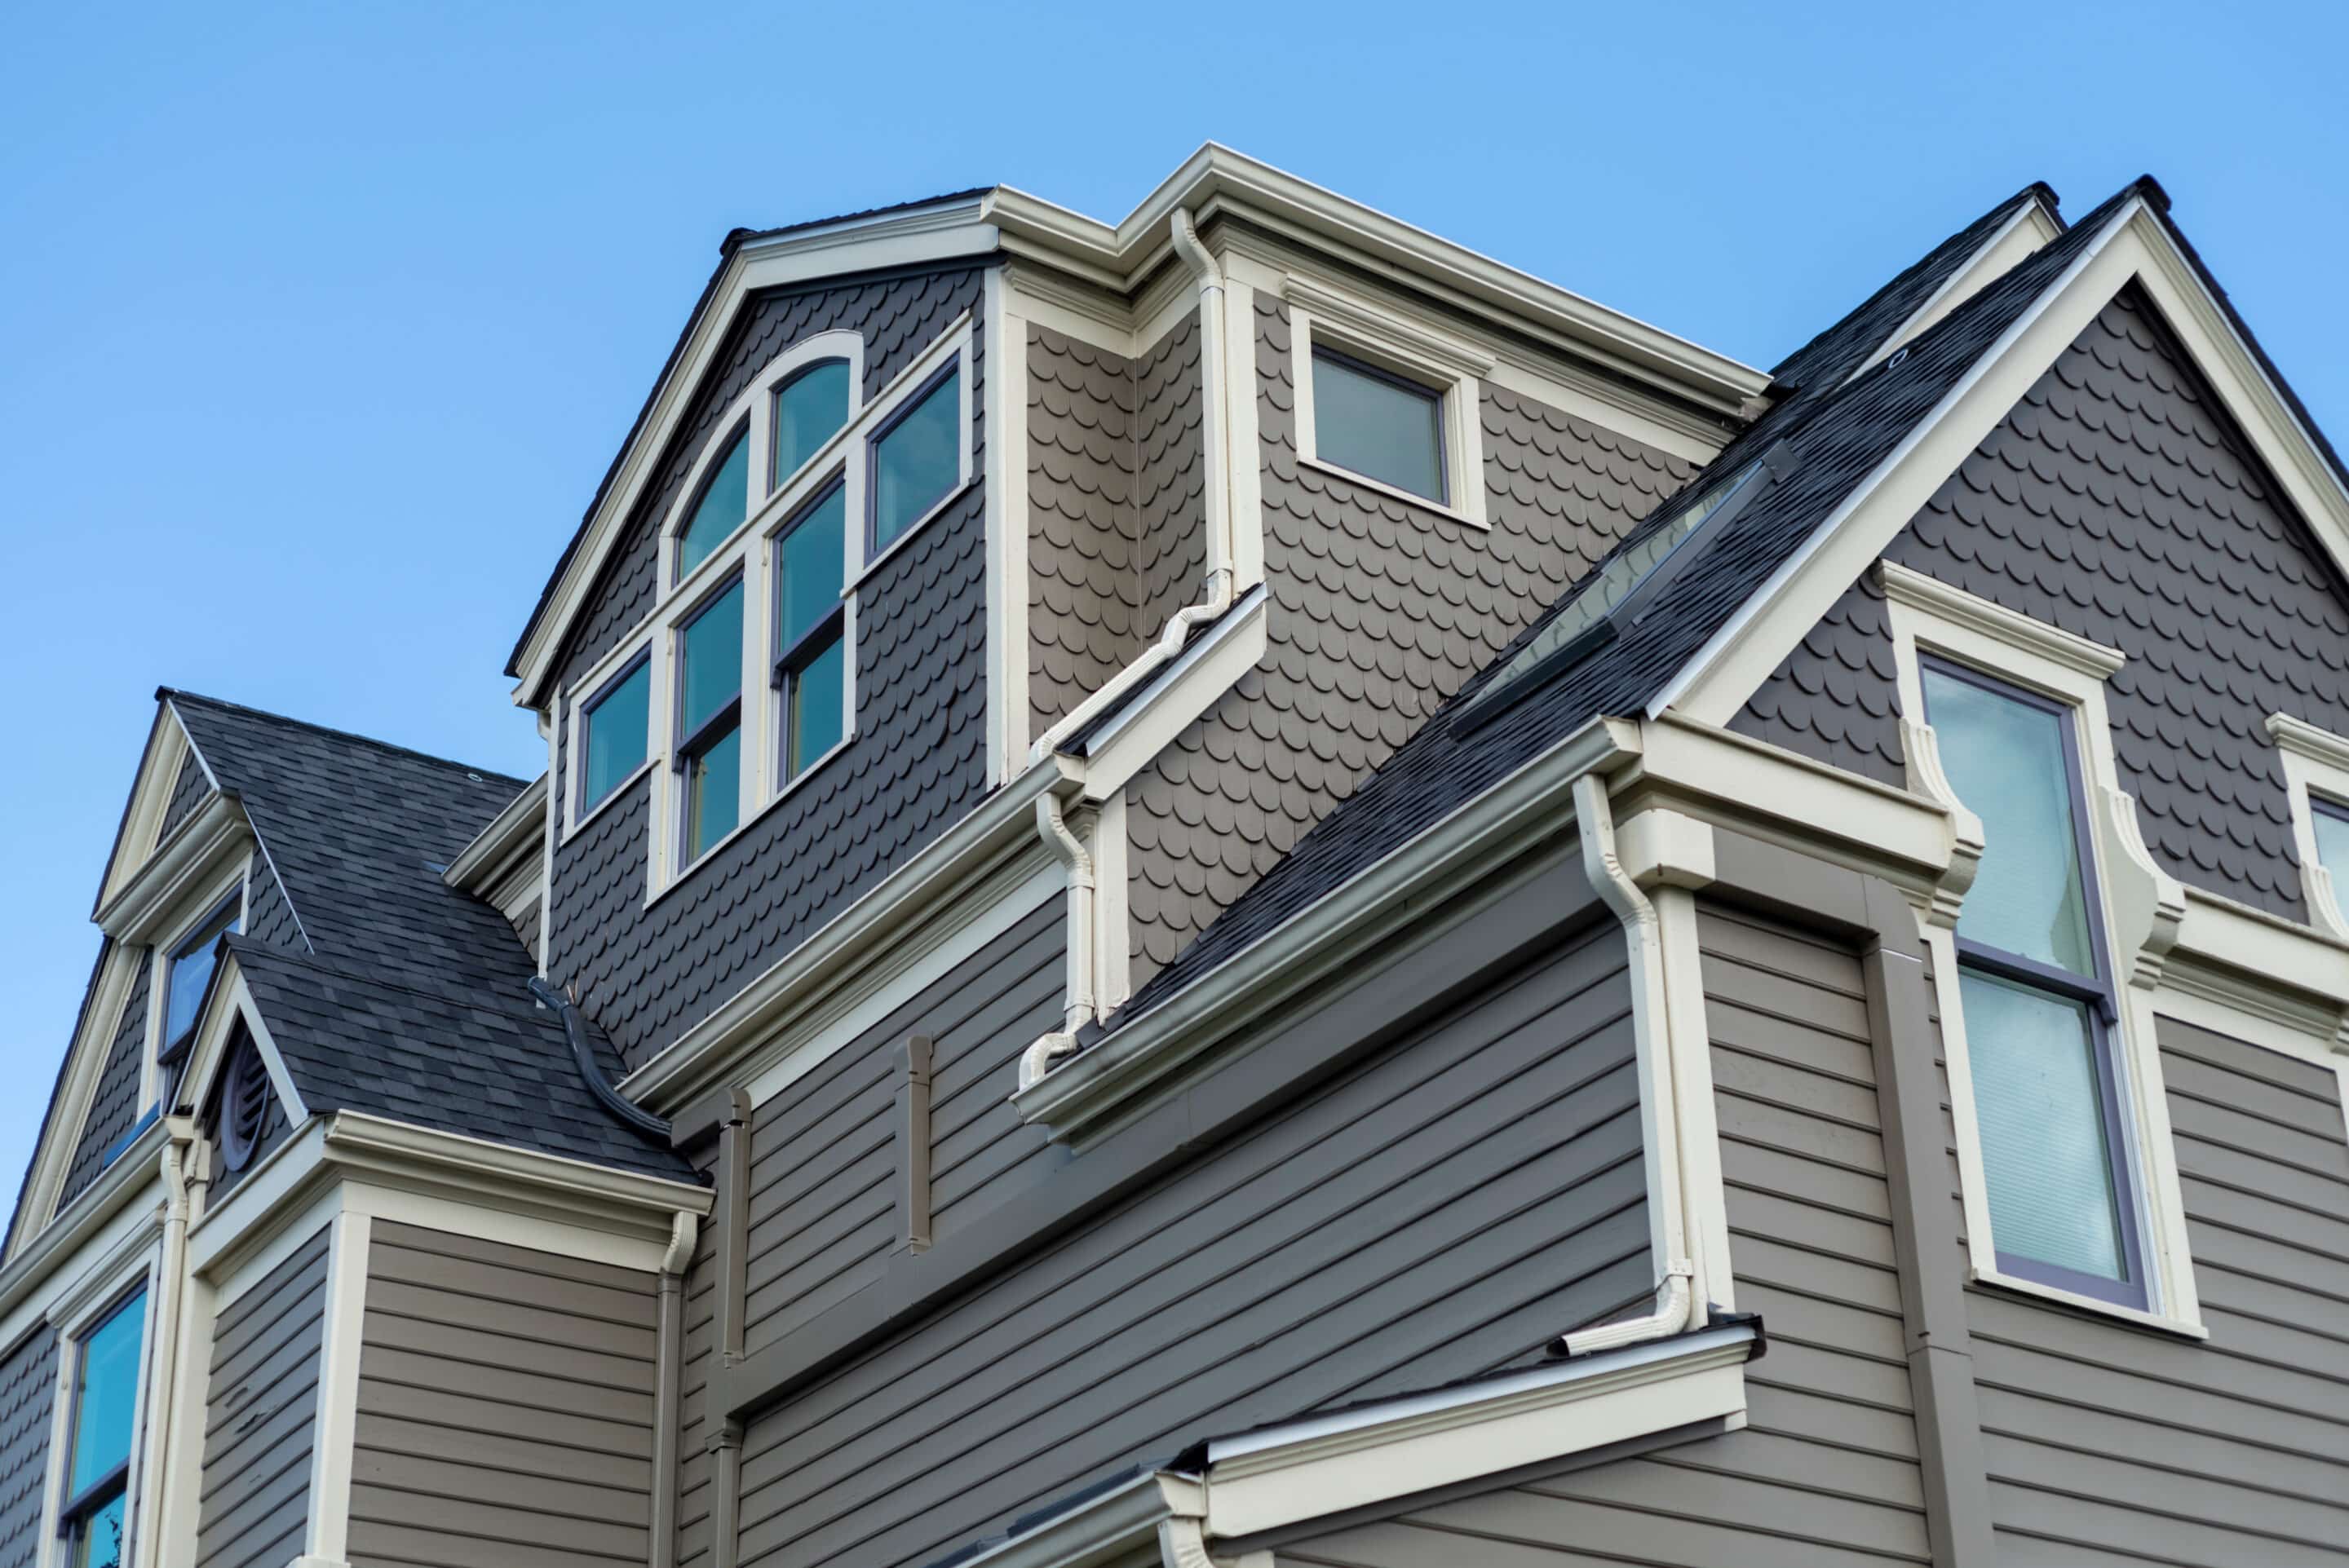 Siding Installers scaled